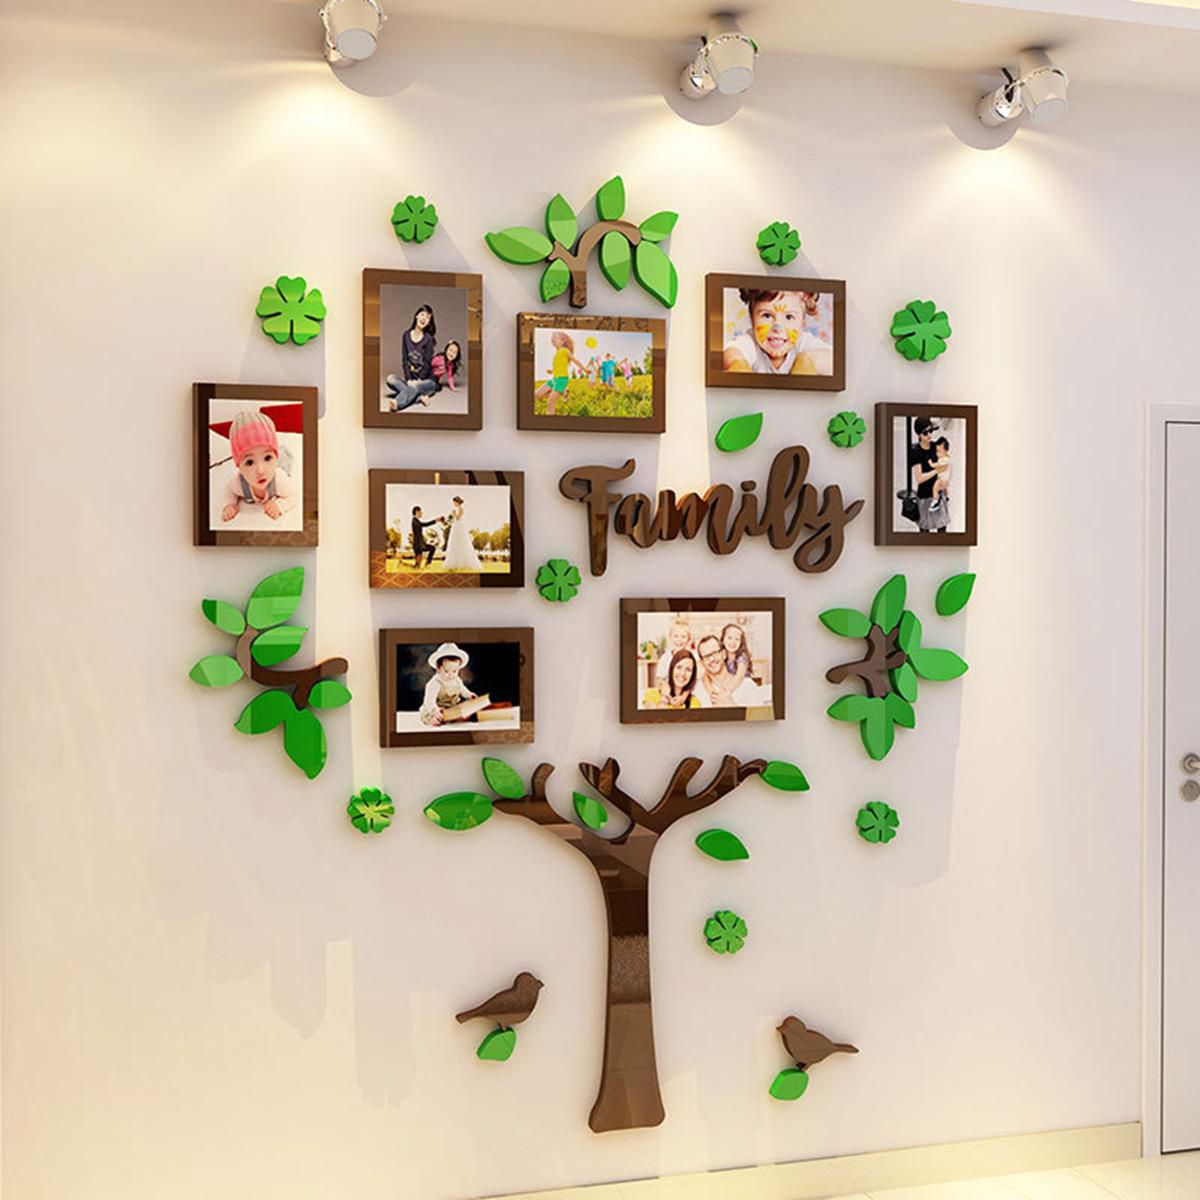 Download 3d Family Tree Pictures Photo Frame Wall Sticker Home Bedroom Decor Wedding New Buy 3d Family Tree Pictures Photo Frame Wall Sticker Home Bedroom Decor Wedding New Online At Low Price In